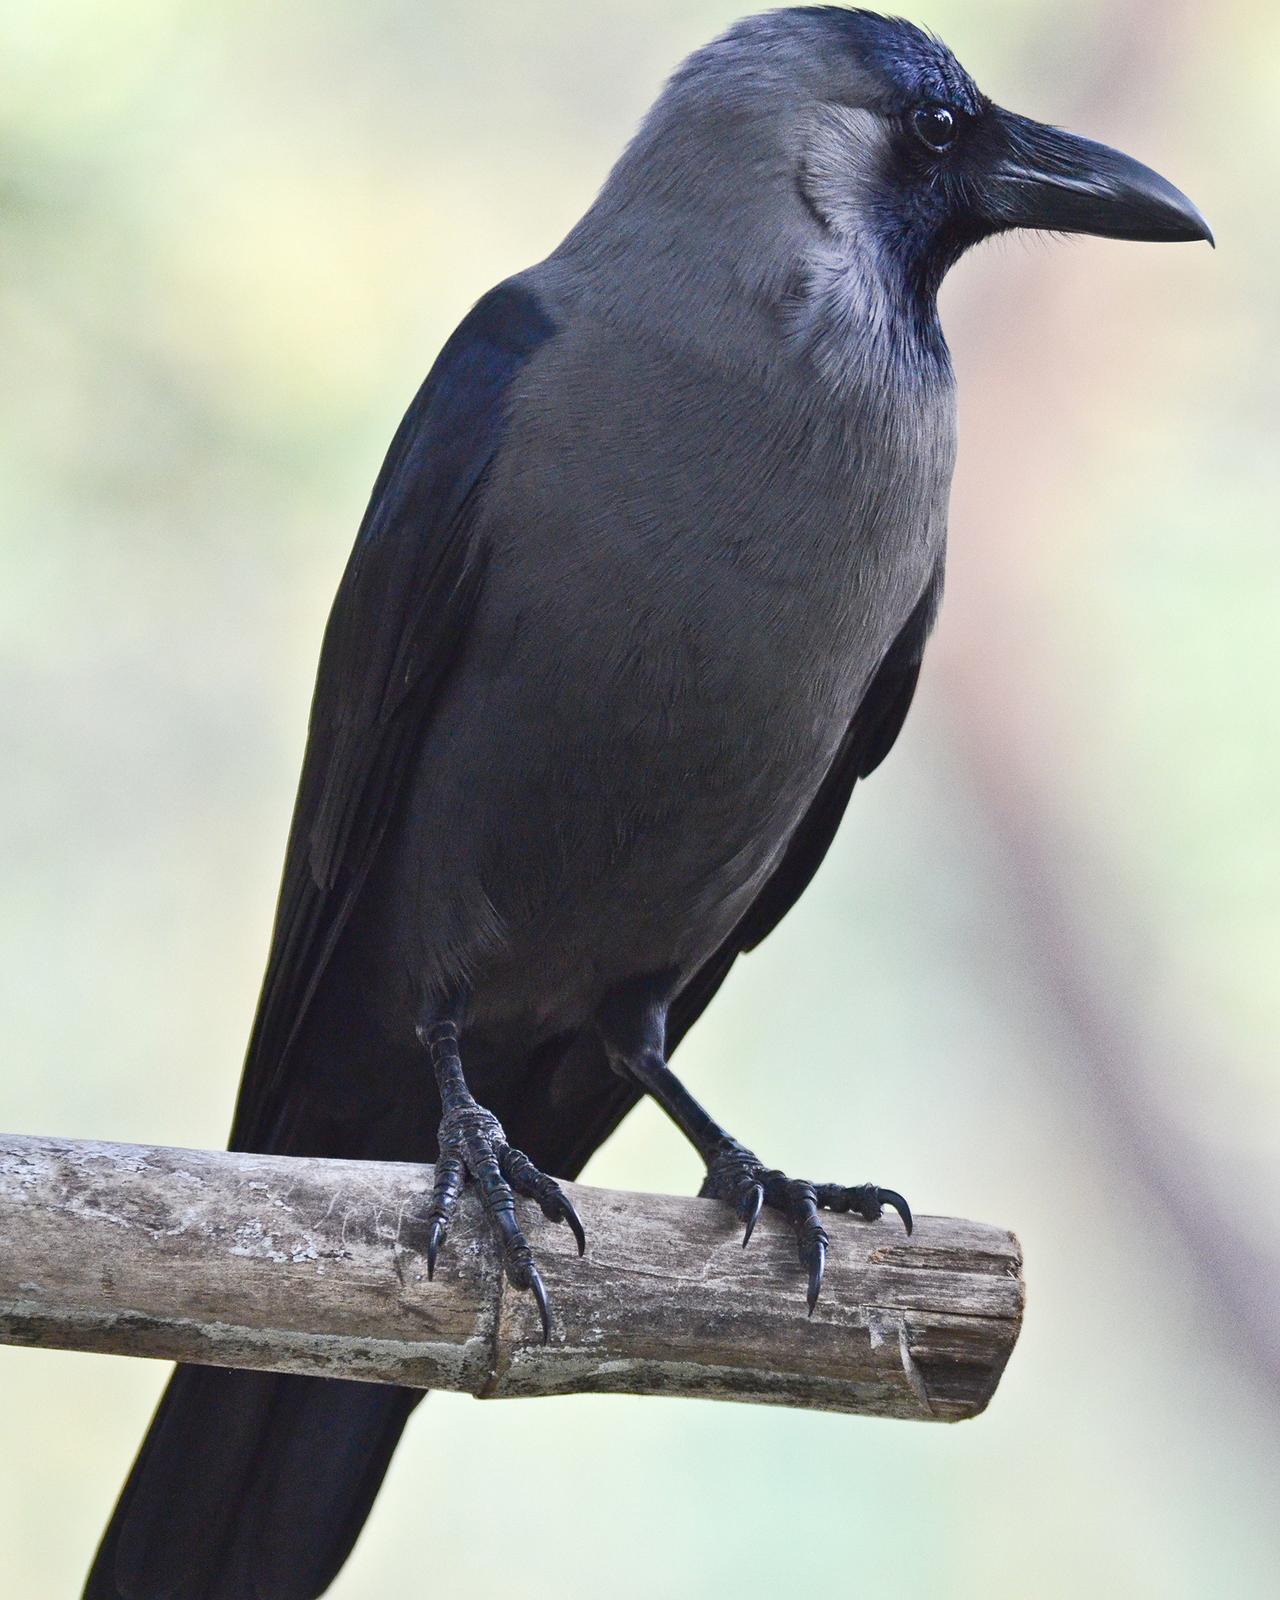 House Crow Photo by Pete Myers